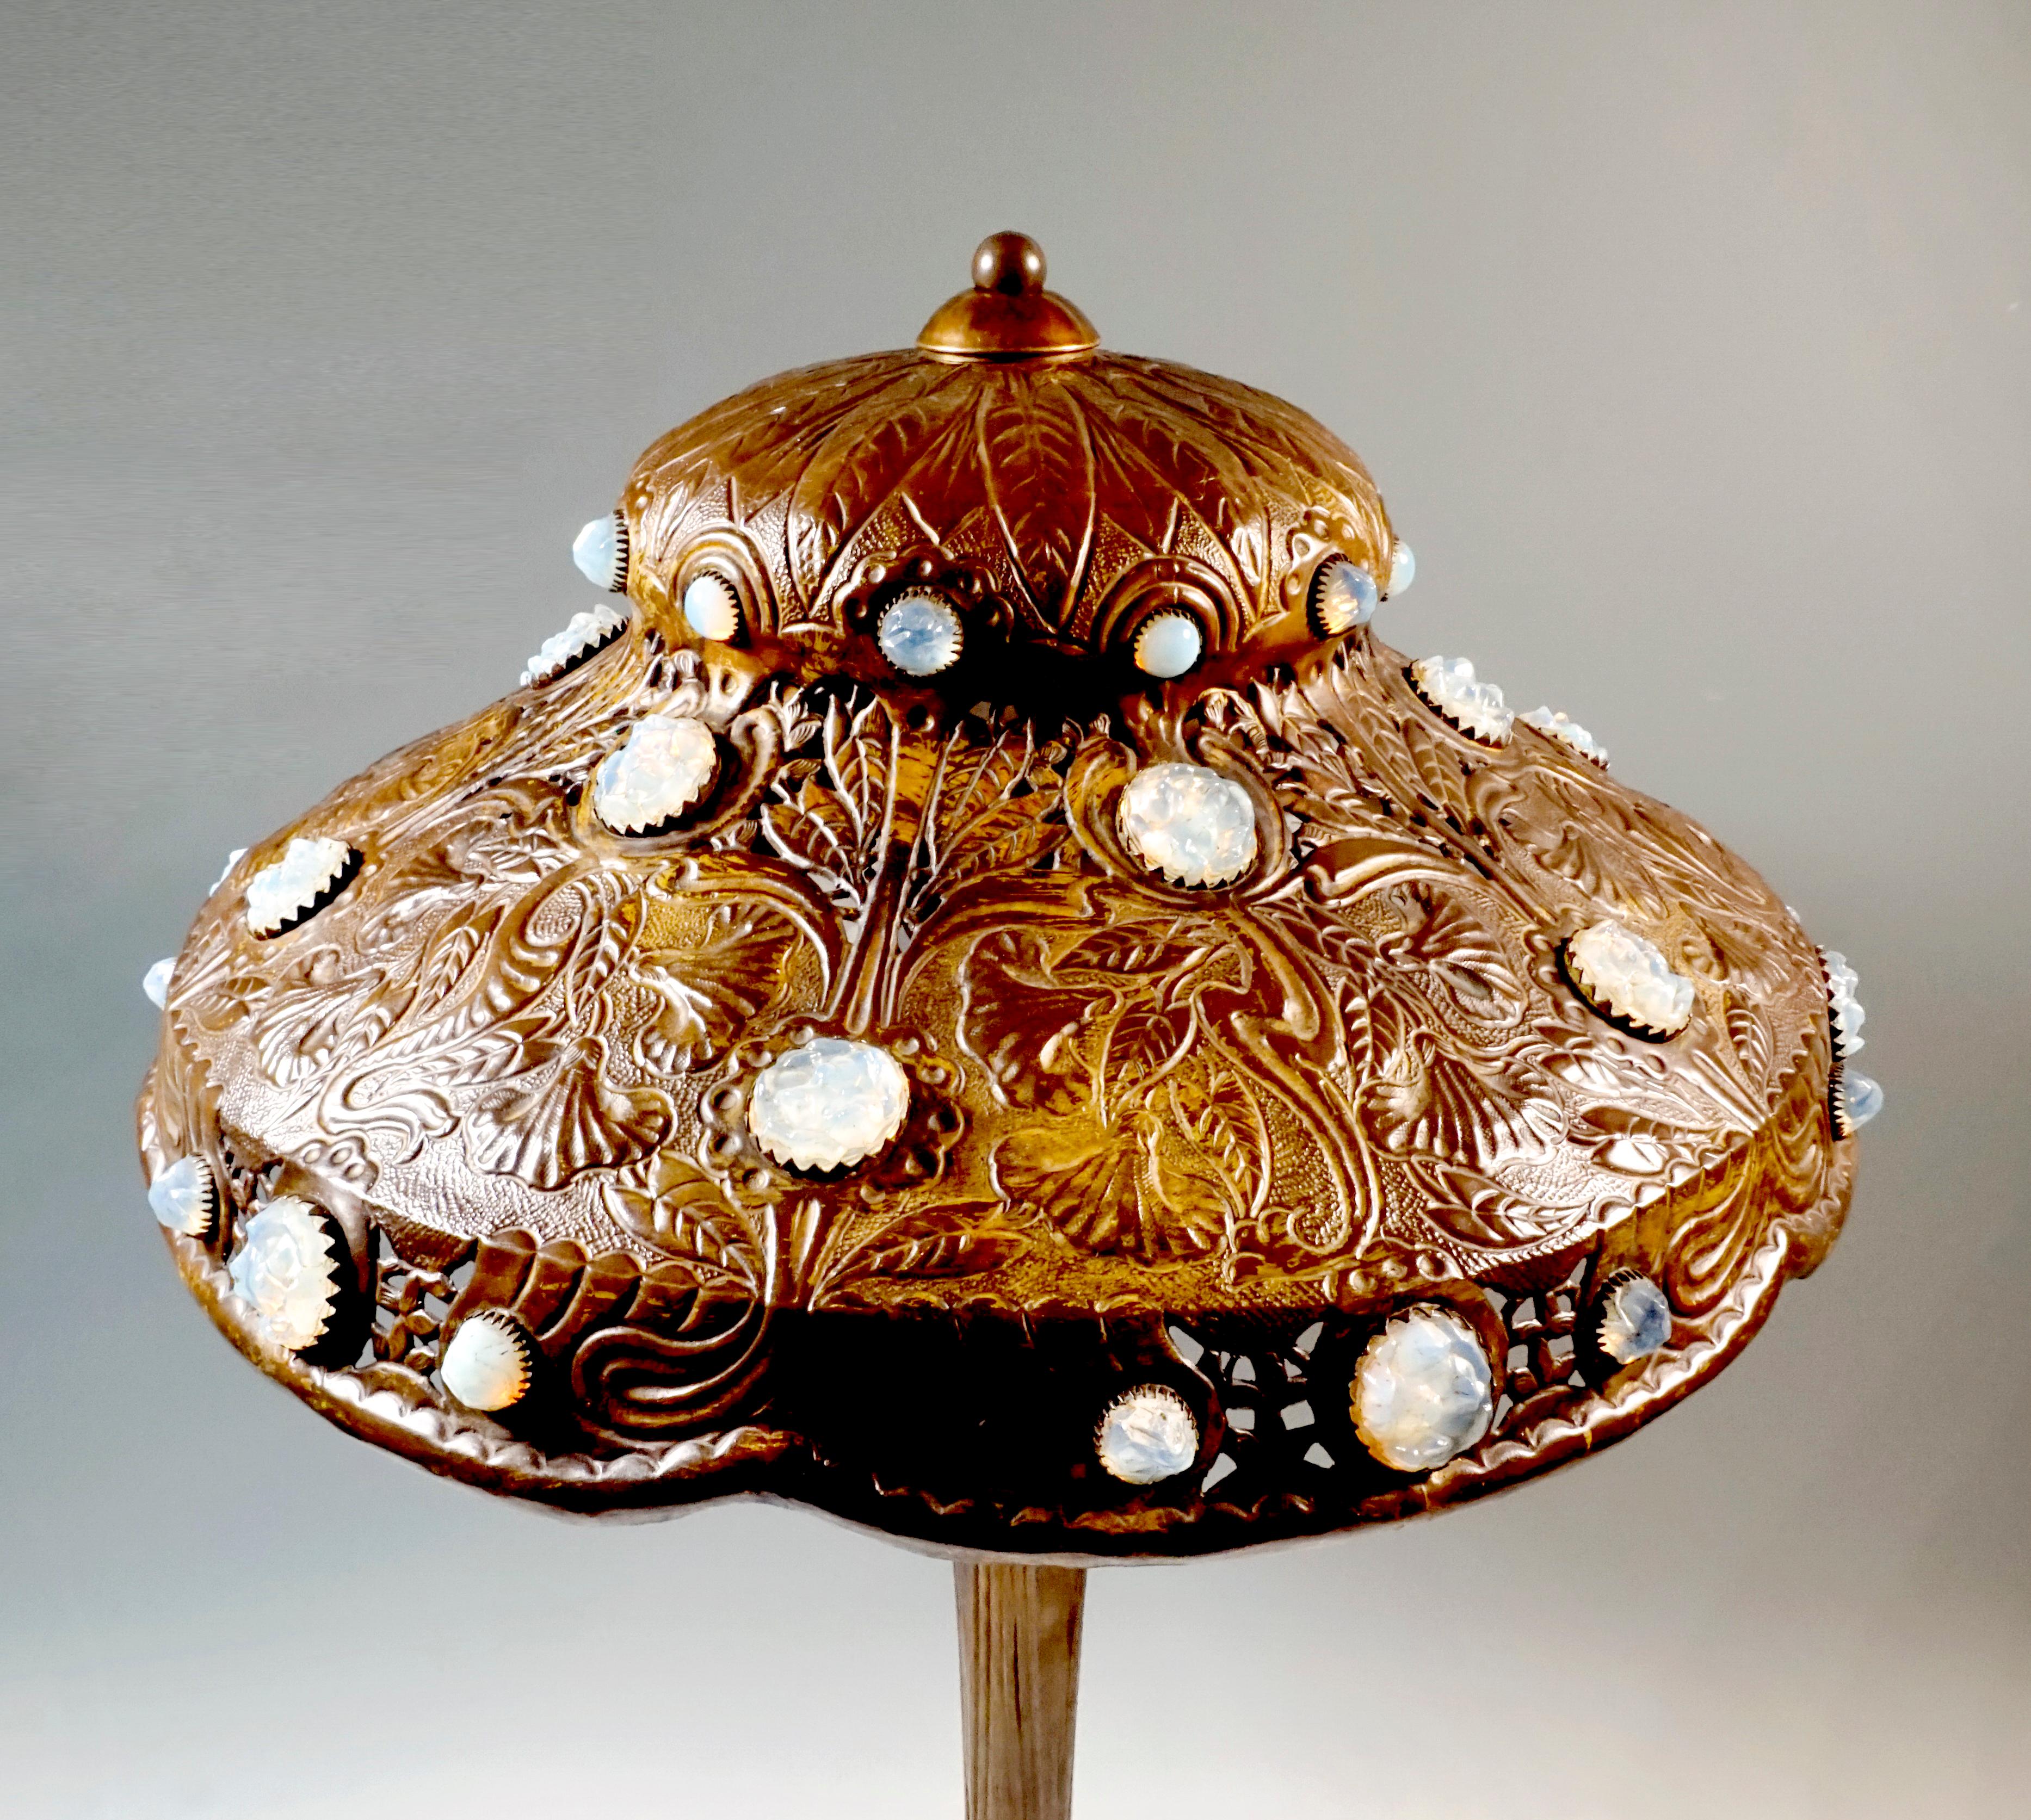 Early 20th Century High Art Nouveau Table Lamp with Caryatides, circa 1900